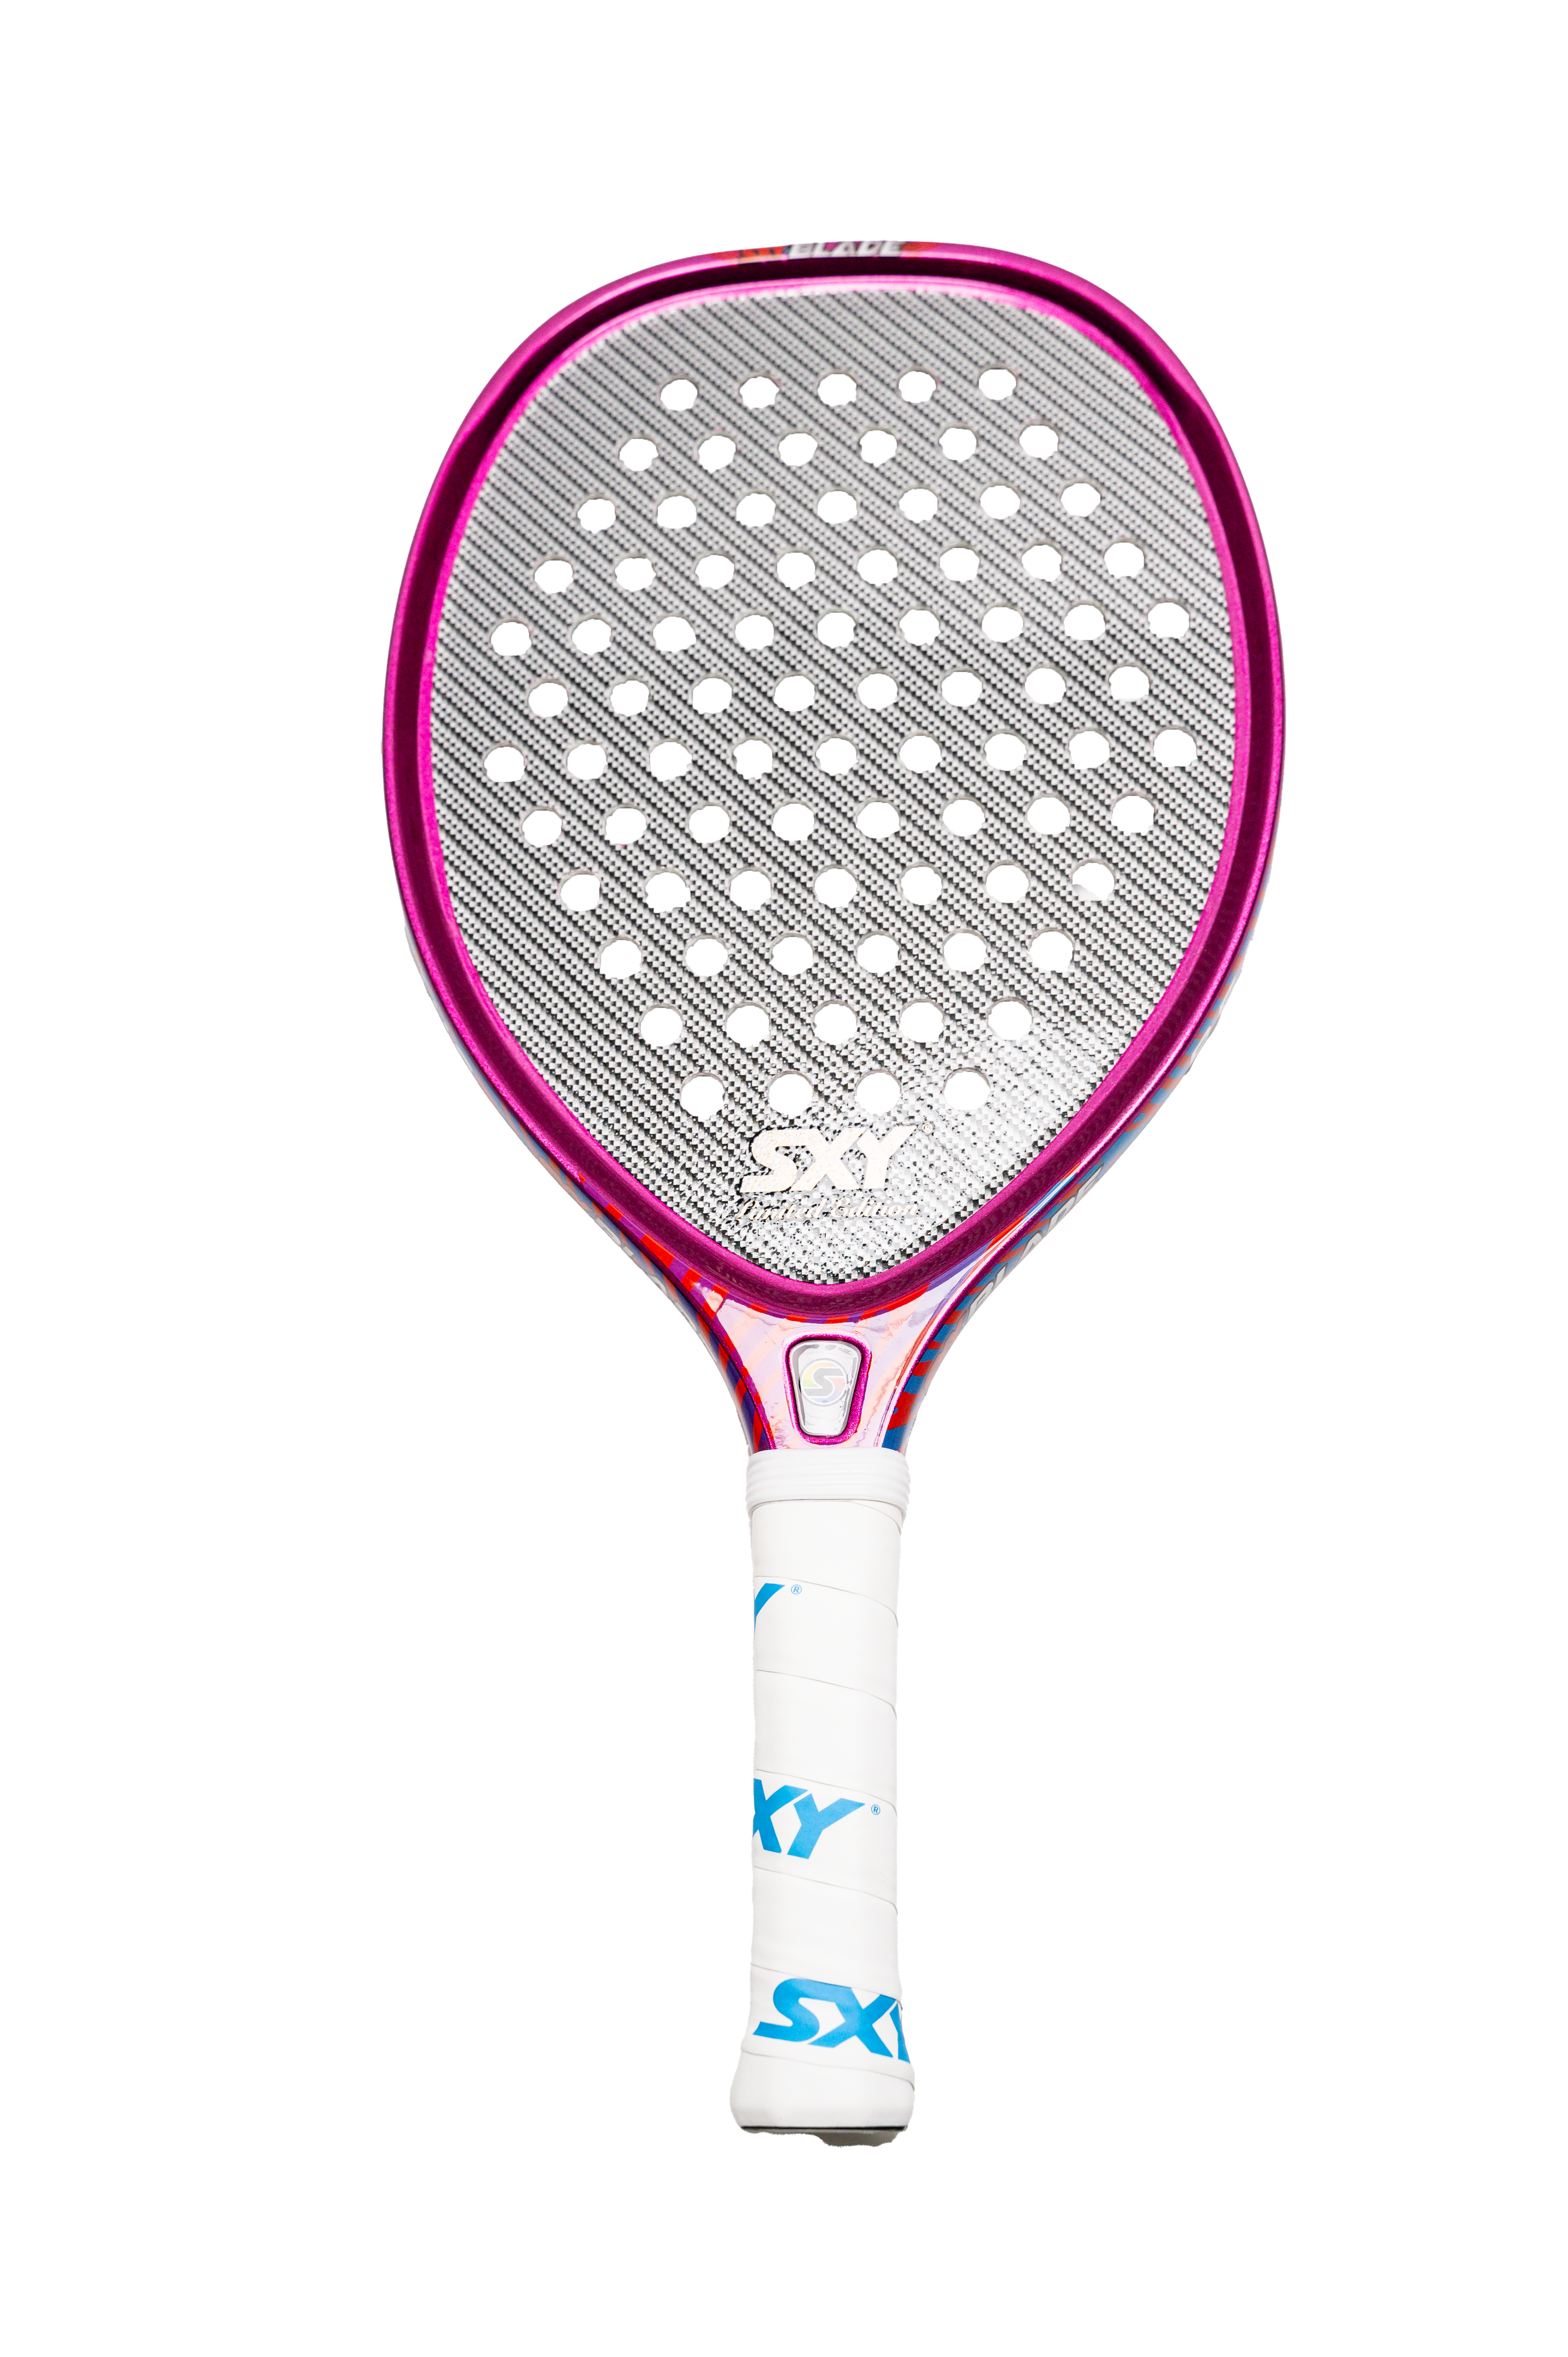 SXY Blade 2.0 Limited Edition Paddle in Purple/Red Metallic